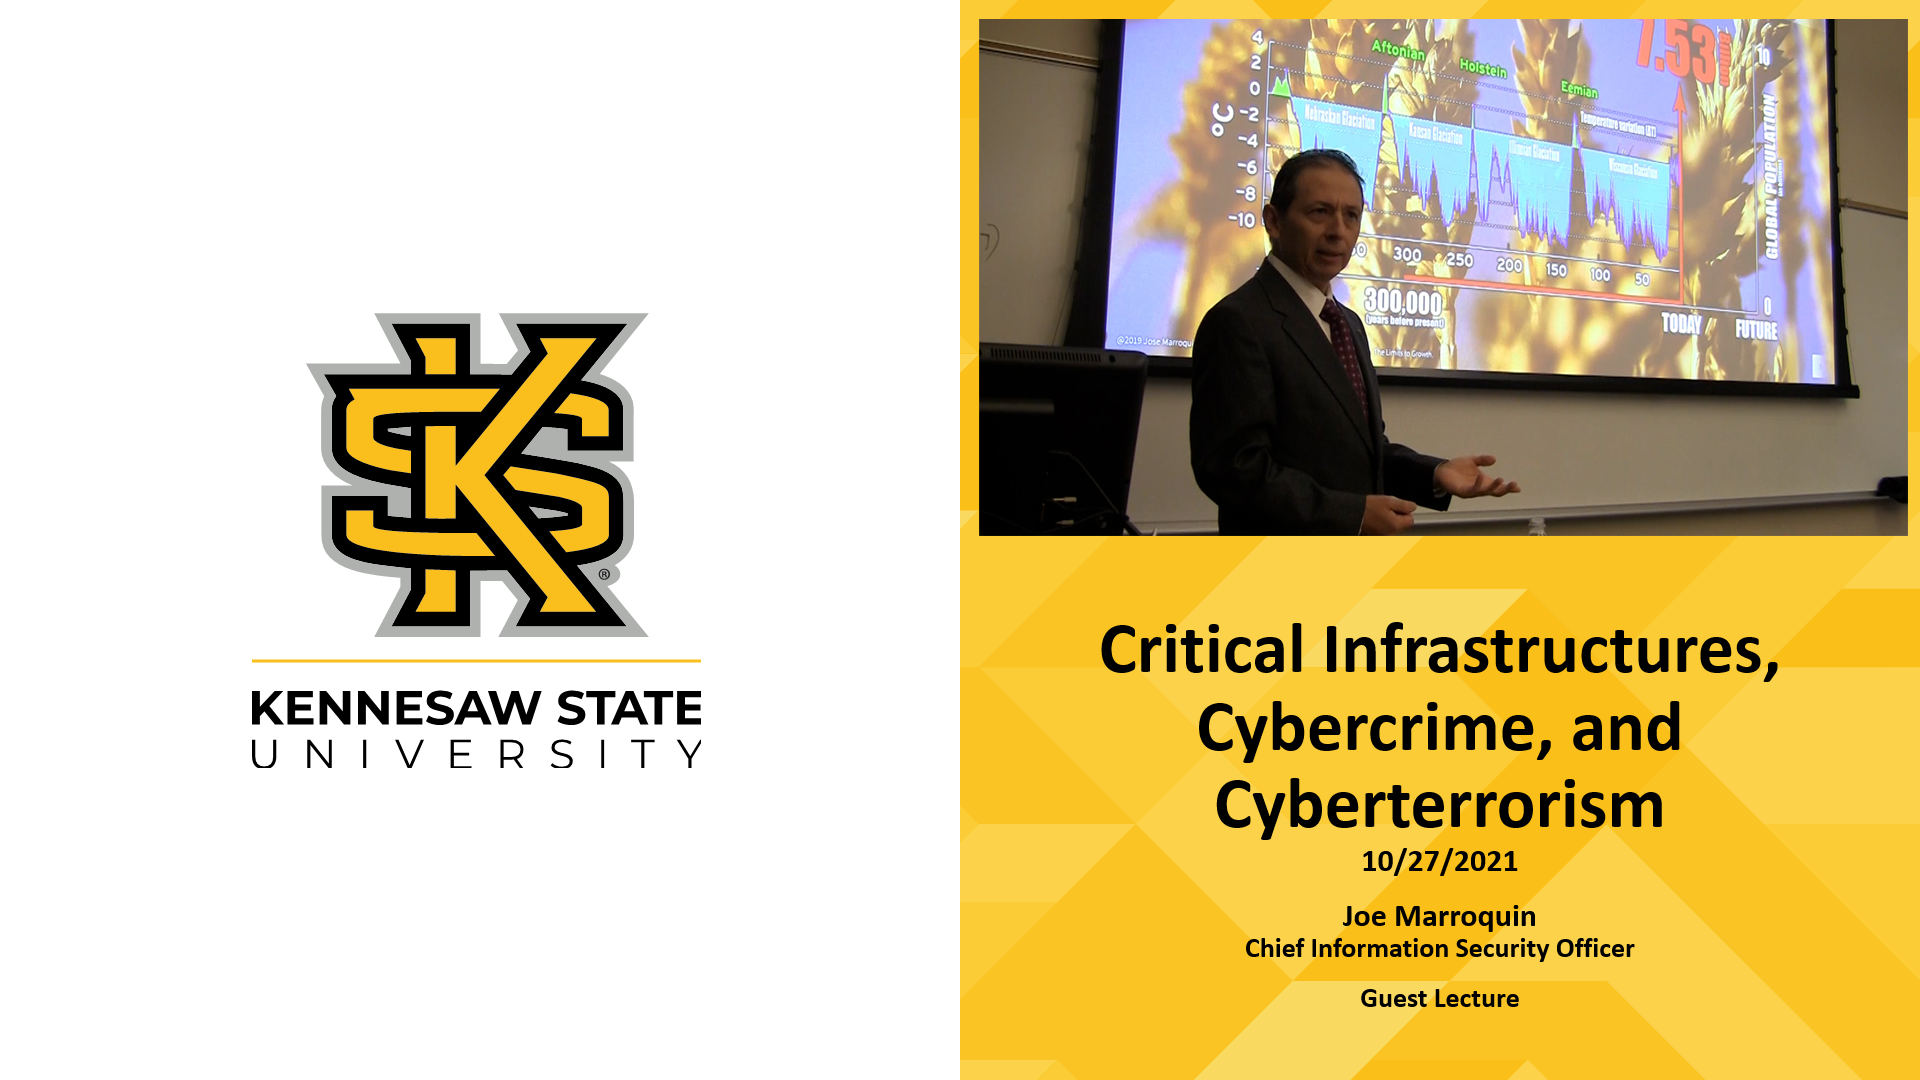 Critical Infrastructures, Cybersecurity, and Cyberterrorism